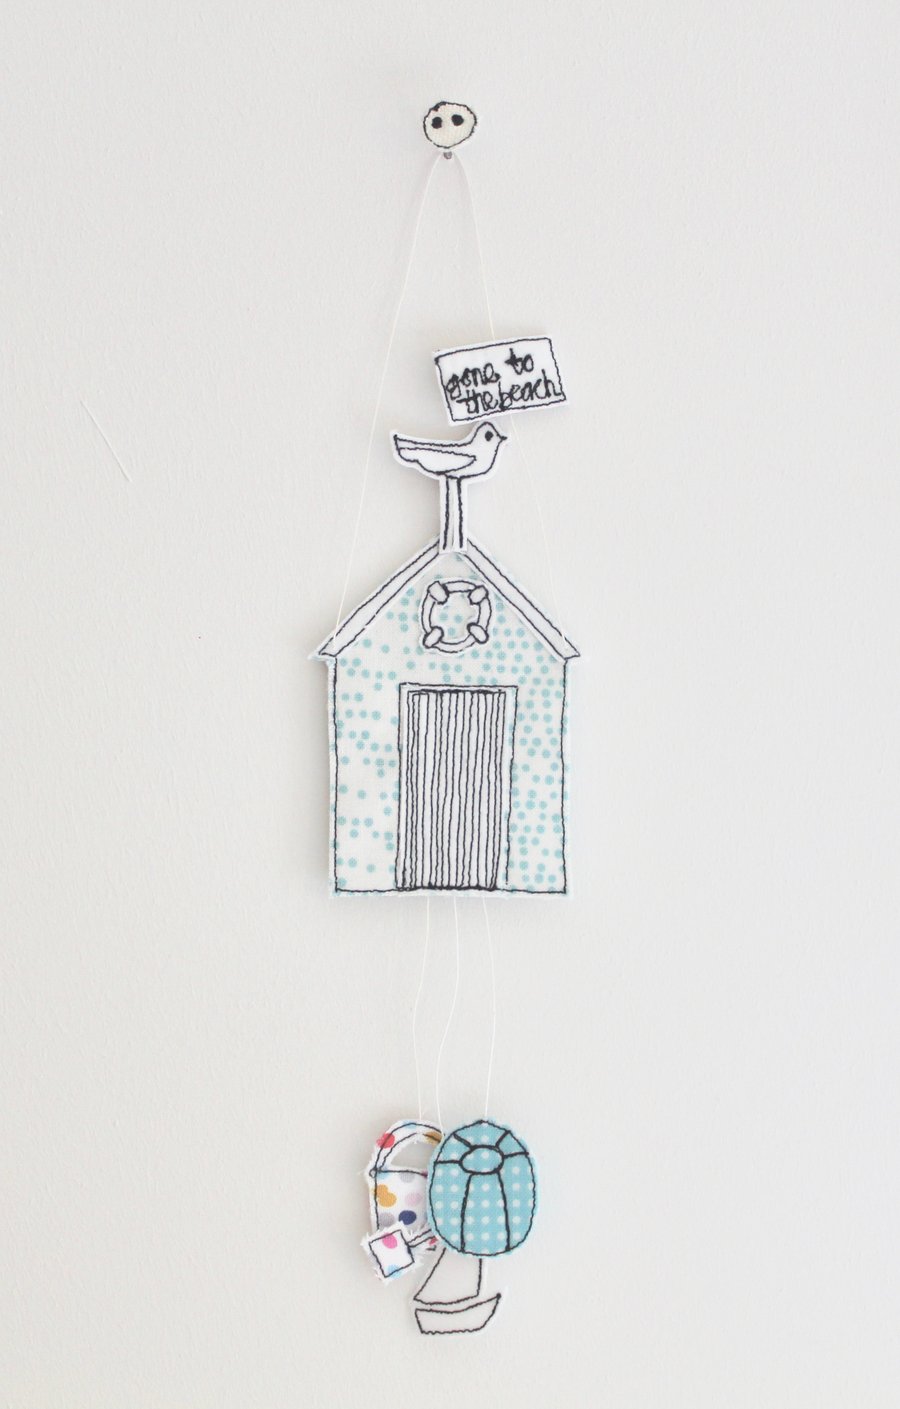 'Gone to the Beach' - Beach Hut Hanging Decoration